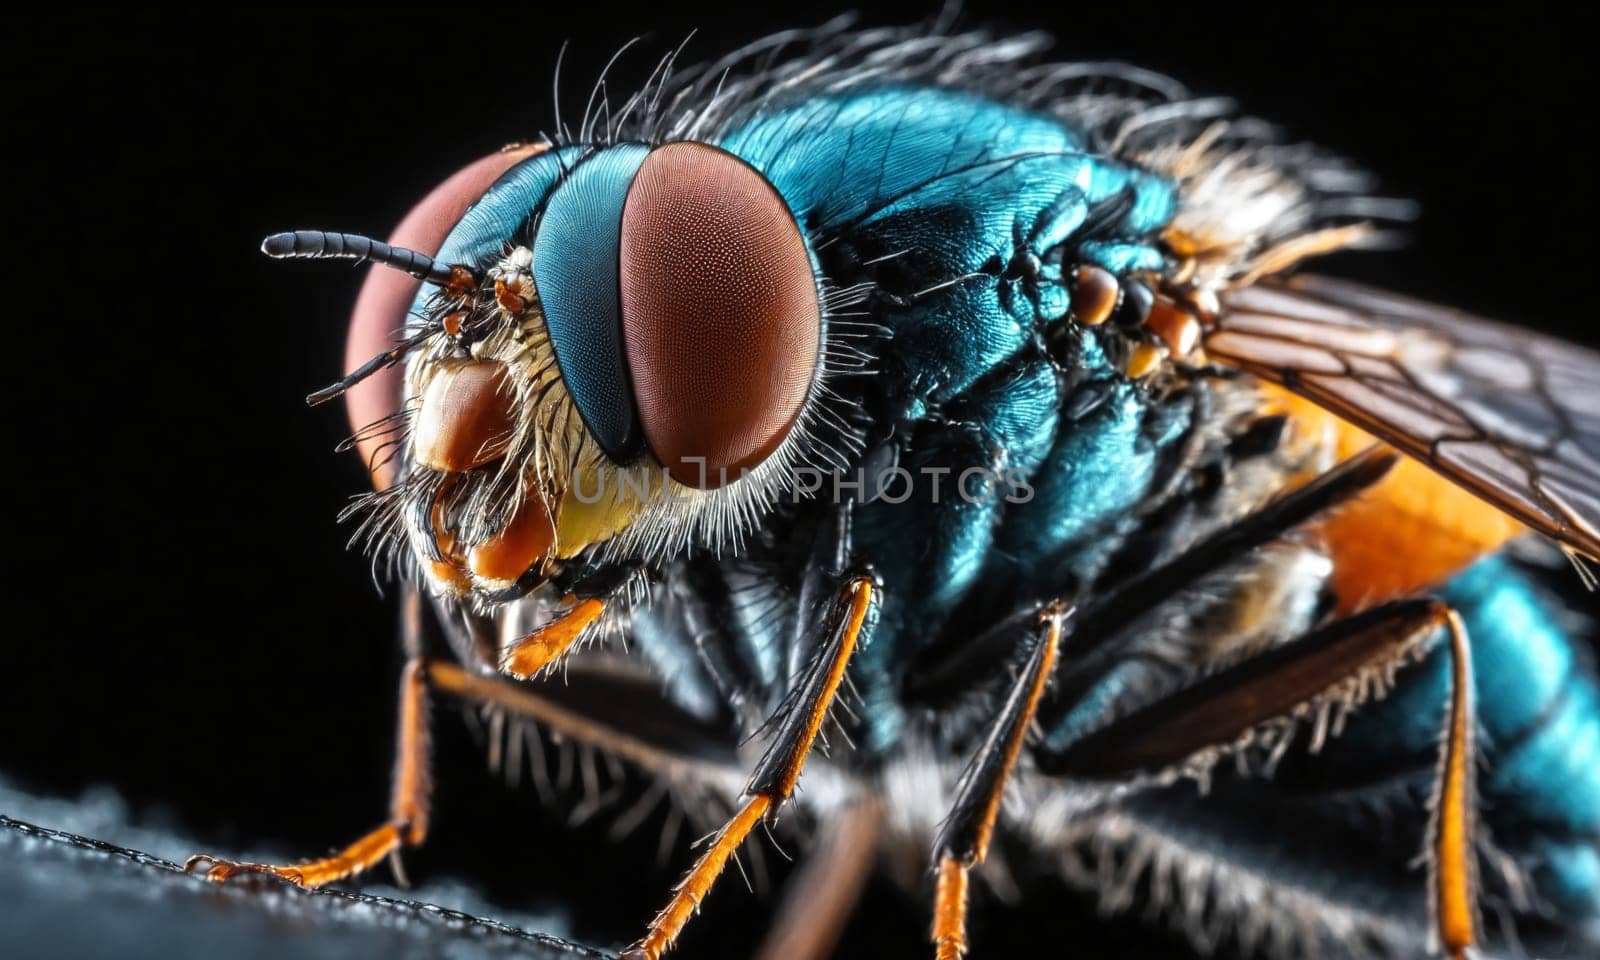 Closeup macro photography of a house fly on a black background by Andre1ns